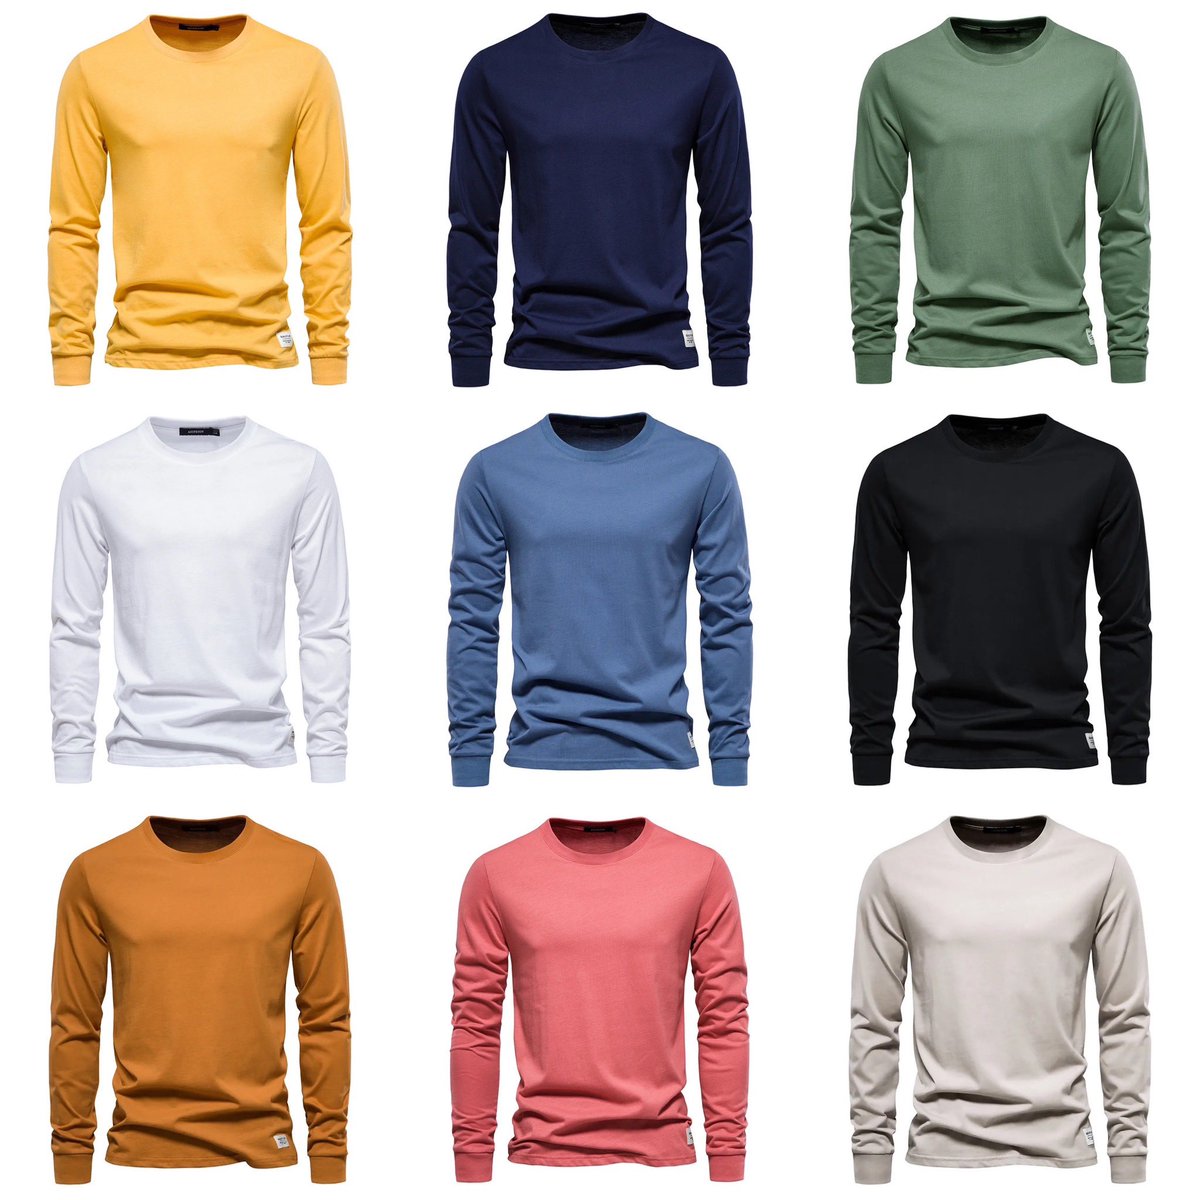 New stock drop- Long Slevee Roundneck tshirts good for the mixed hot/chill weather. #newstock #teamnaiwear